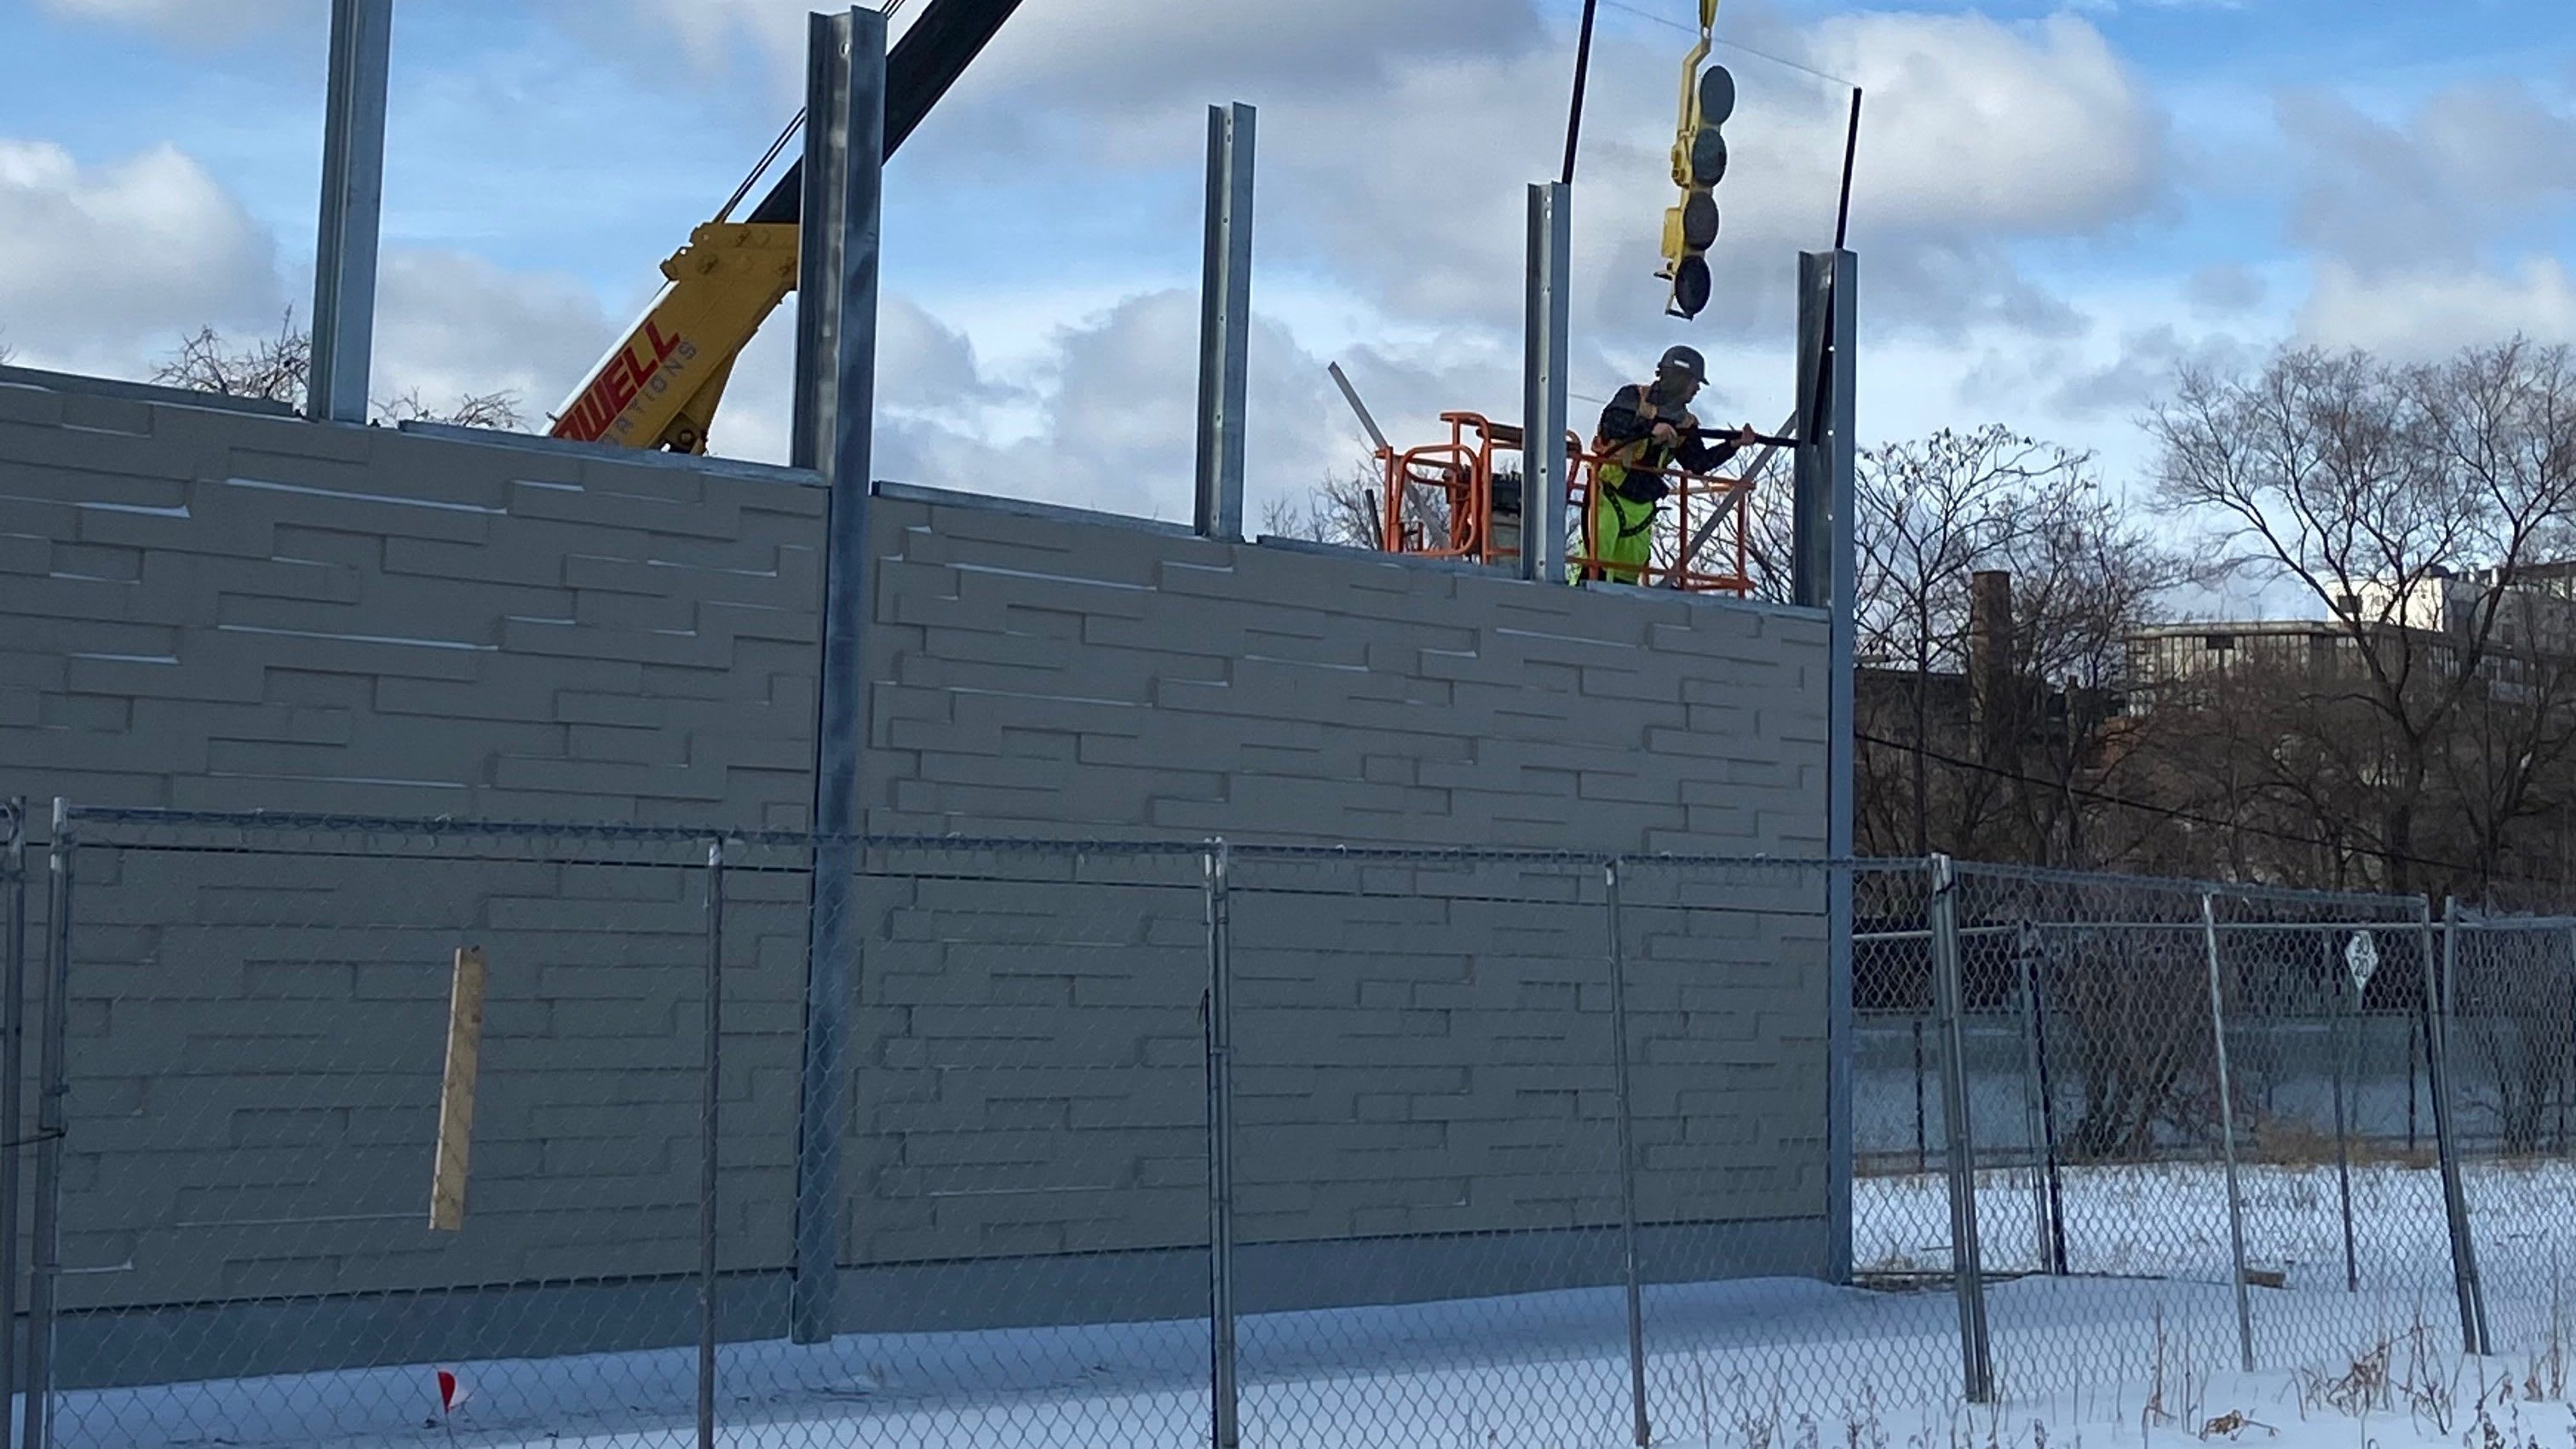 An example of noise walls being installed along the Barrie GO Line this past winter